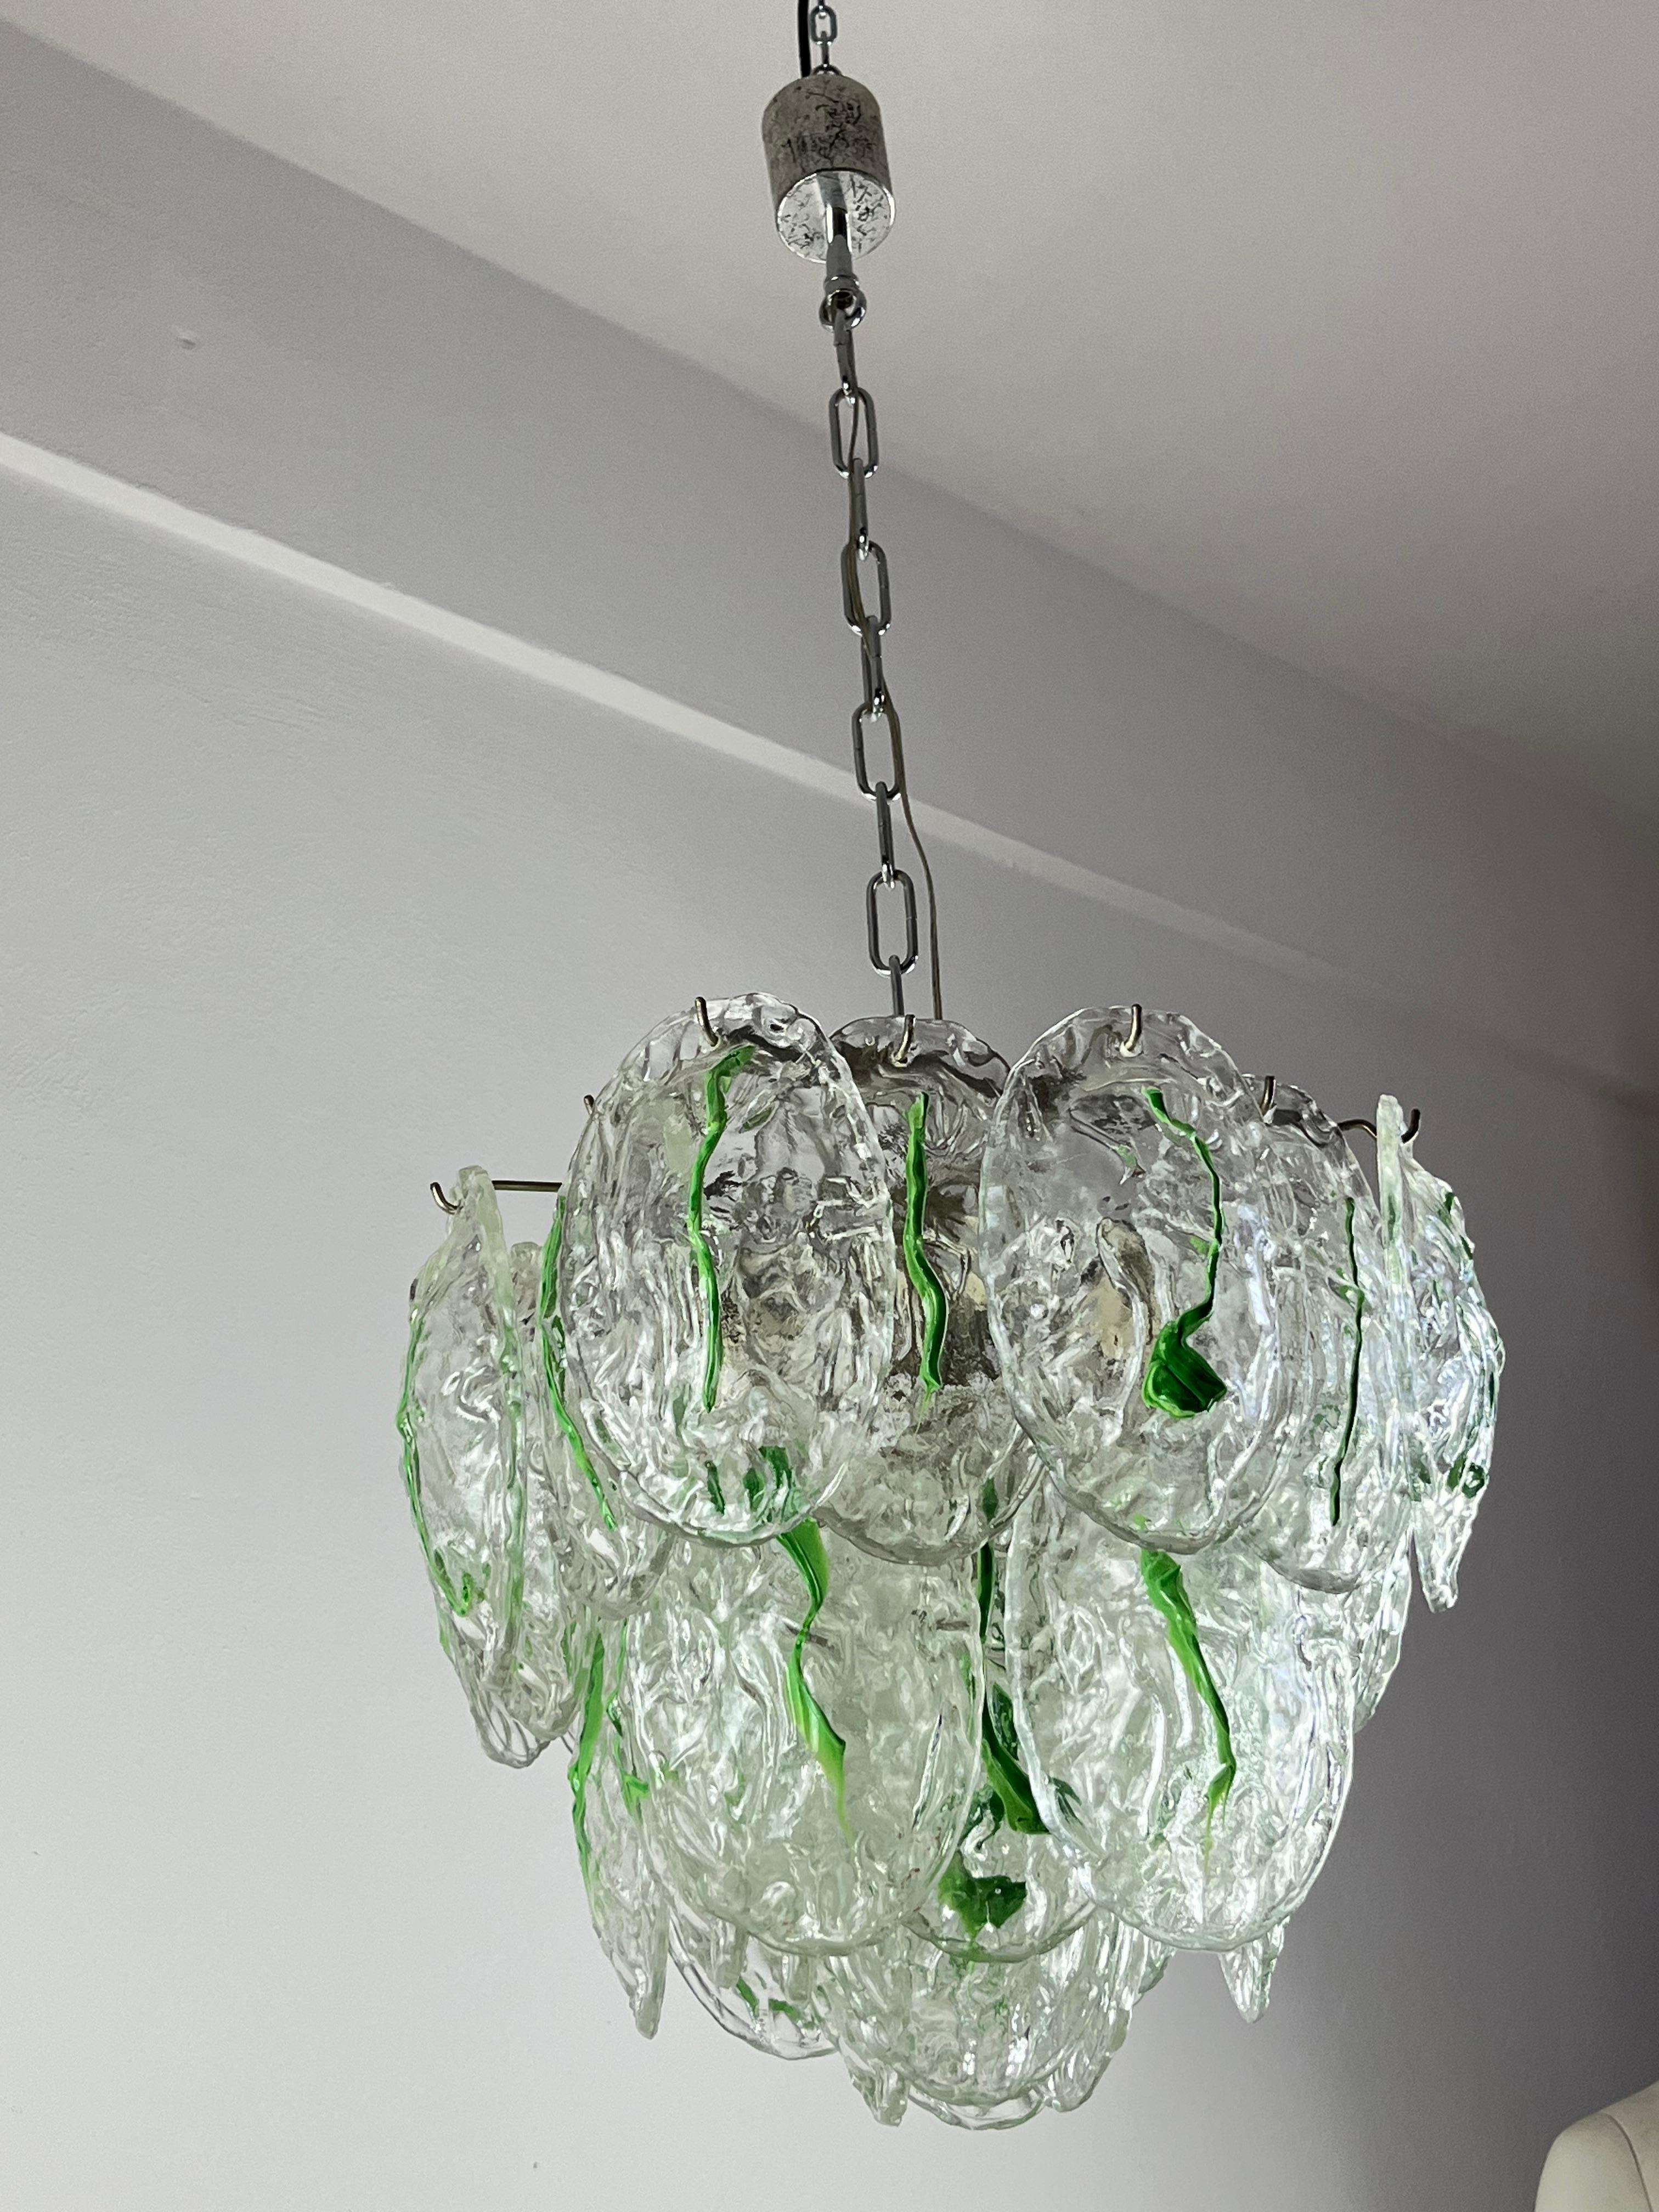 Six-light Murano Glass Chandelier by Vistosi, Italy, 1960s For Sale 5